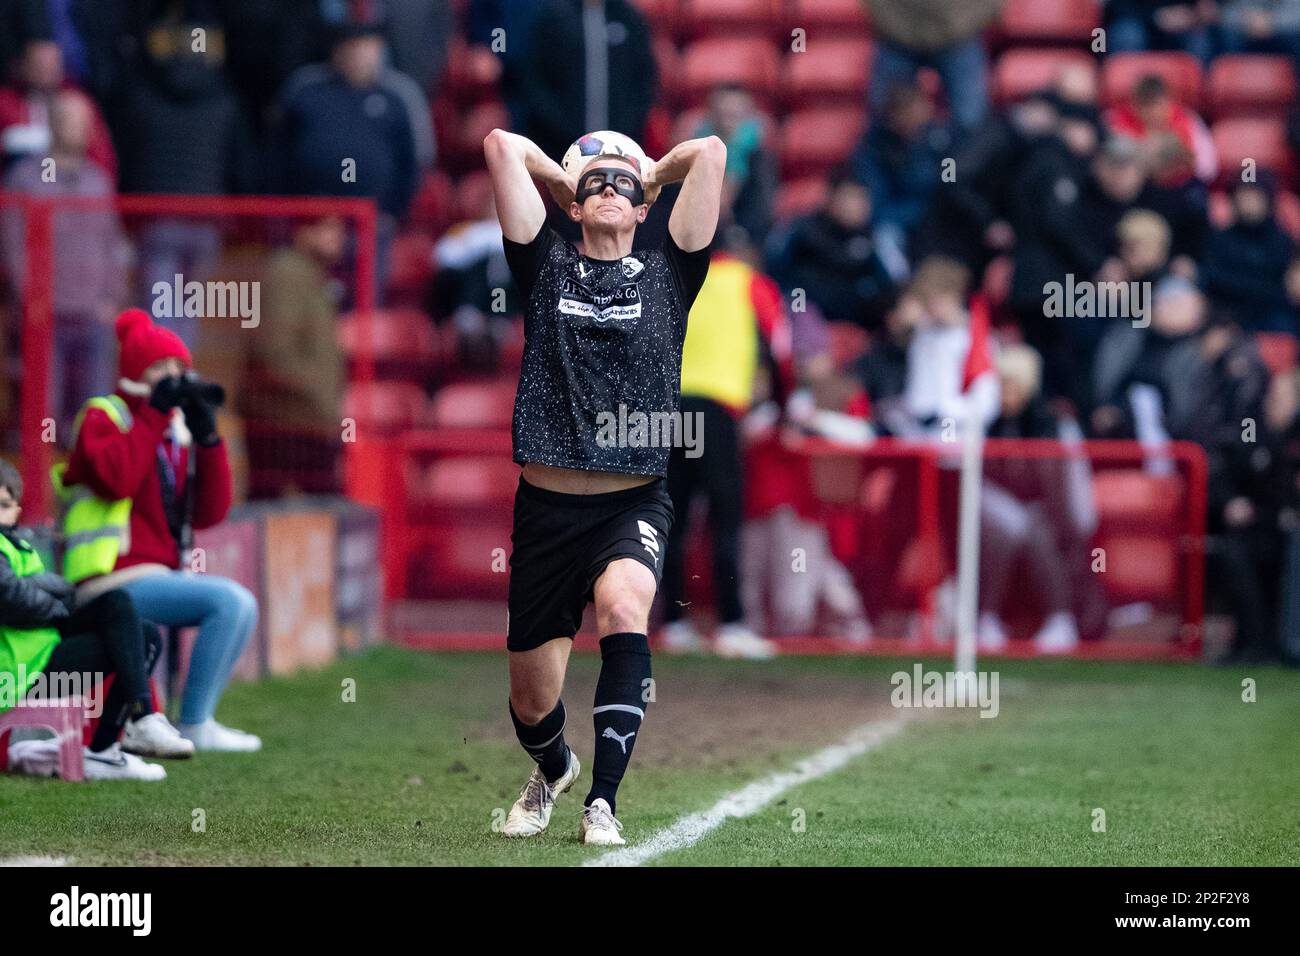 Sam McClelland of Barrow during the Sky Bet League 2 match between Walsall and Barrow at the Banks's Stadium, Walsall on Saturday 4th March 2023. (Photo: Gustavo Pantano | MI News) Credit: MI News & Sport /Alamy Live News Stock Photo